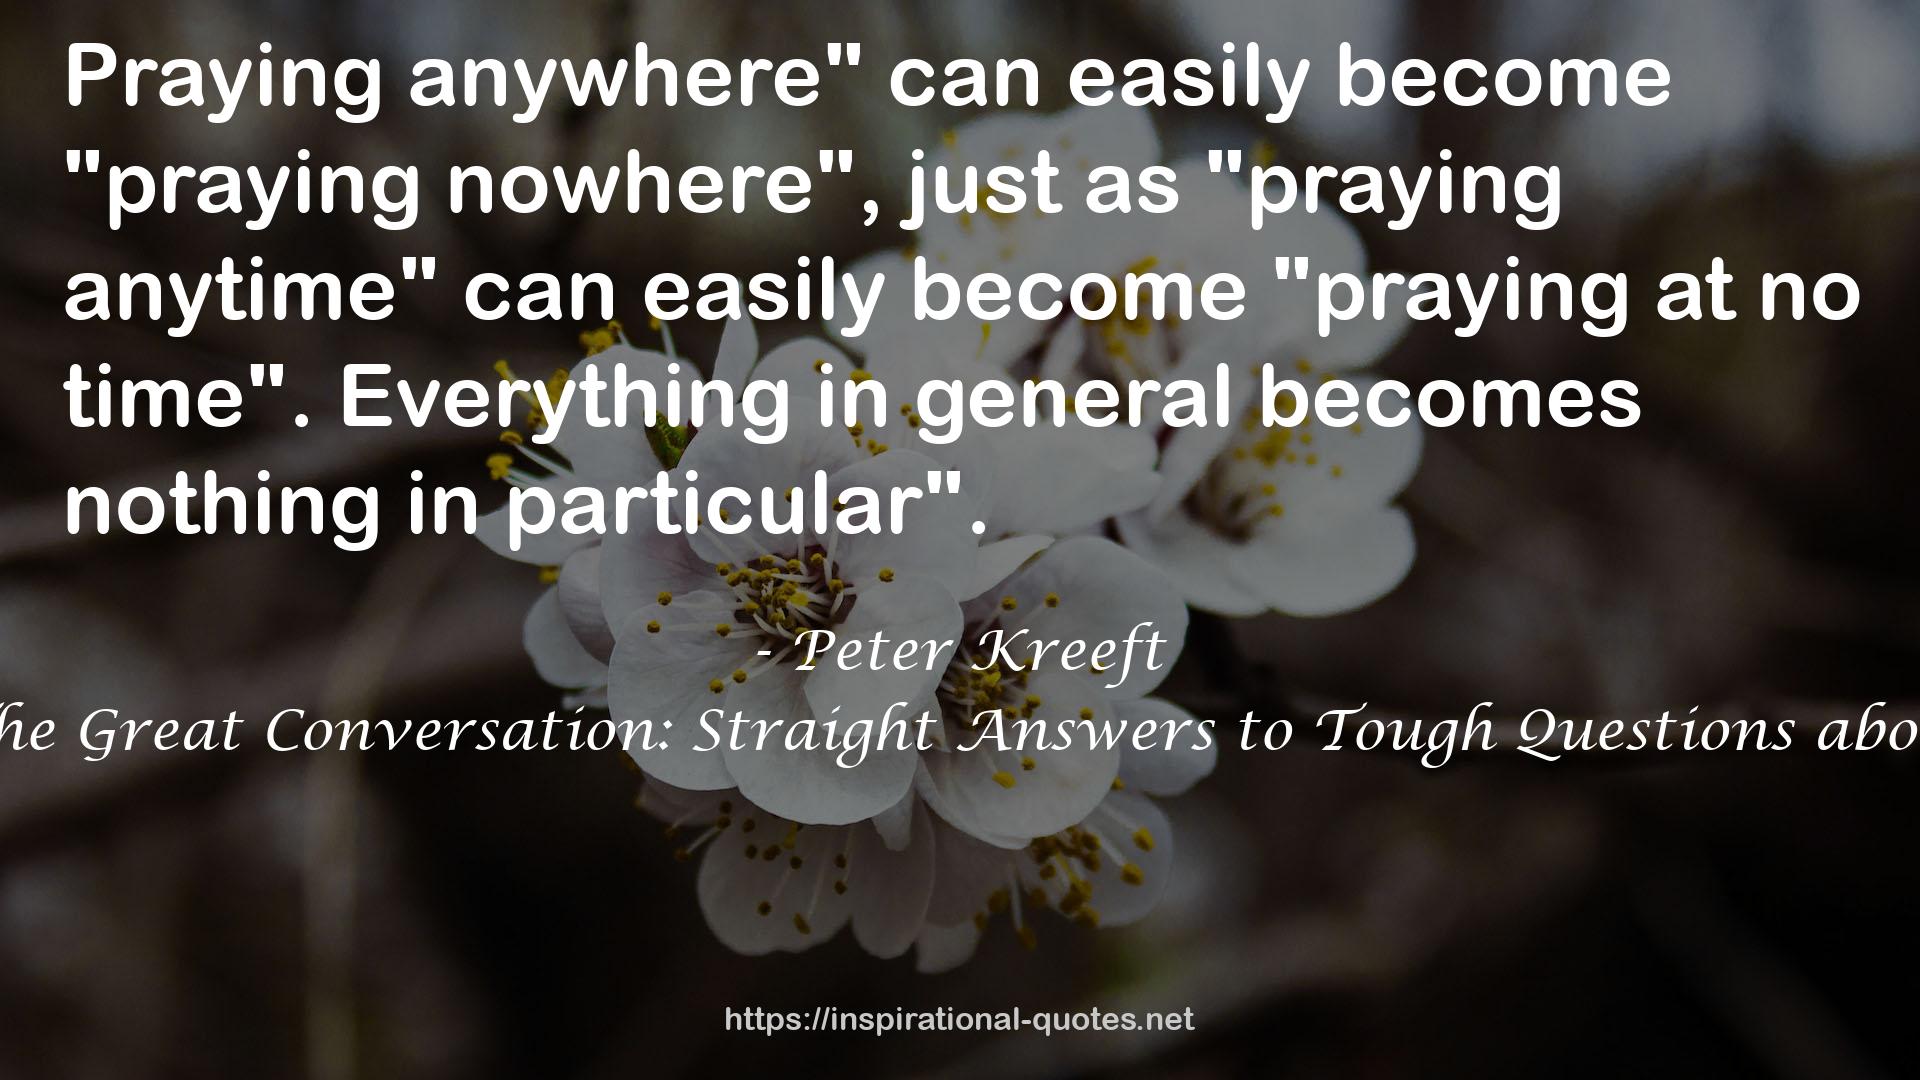 Prayer: The Great Conversation: Straight Answers to Tough Questions about Prayer QUOTES